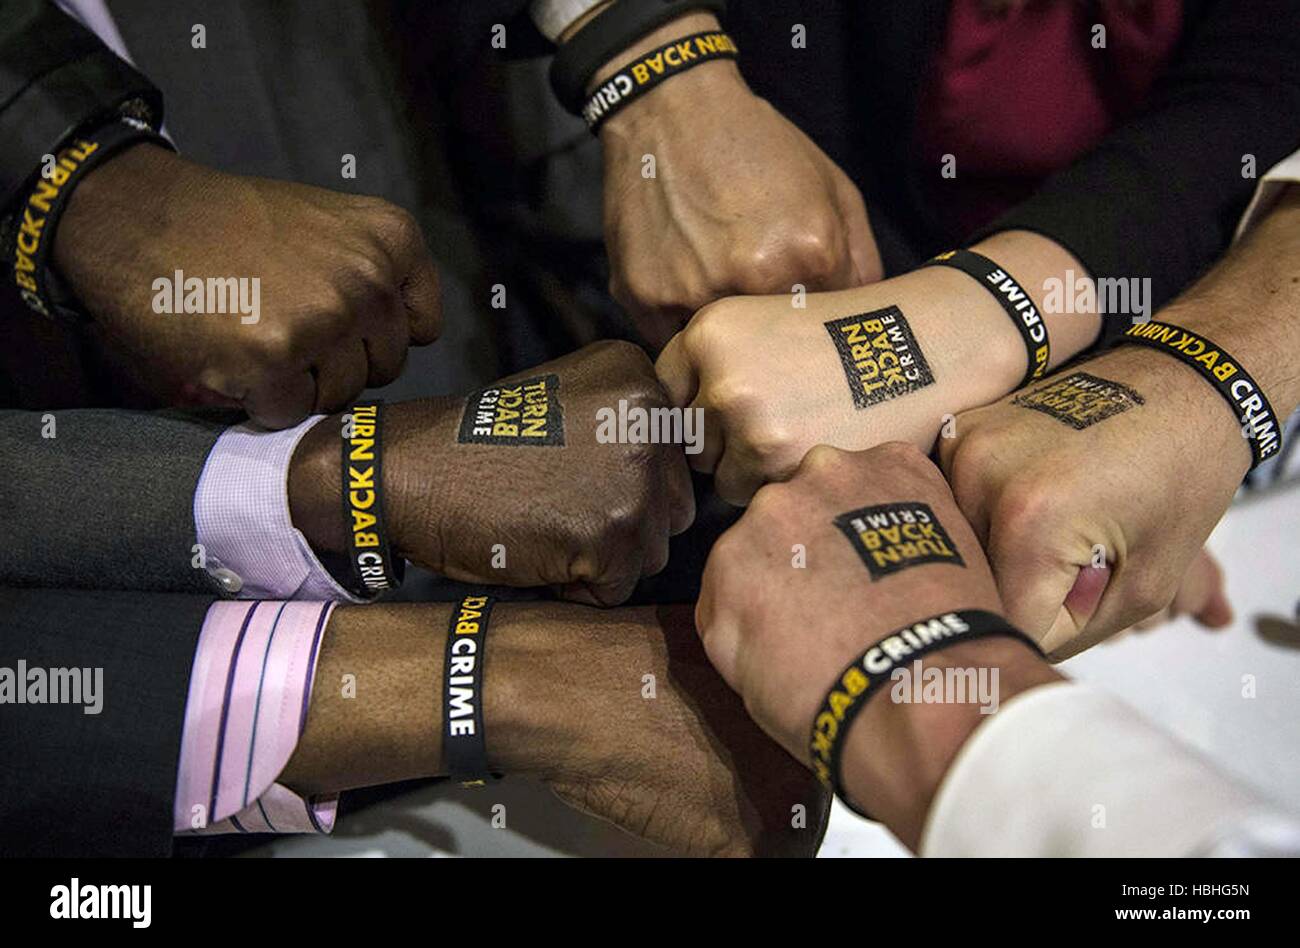 Turn Back Crime campaign bands on seven hands of supporters of Shah Rukh Khan in London, England, UK Stock Photo